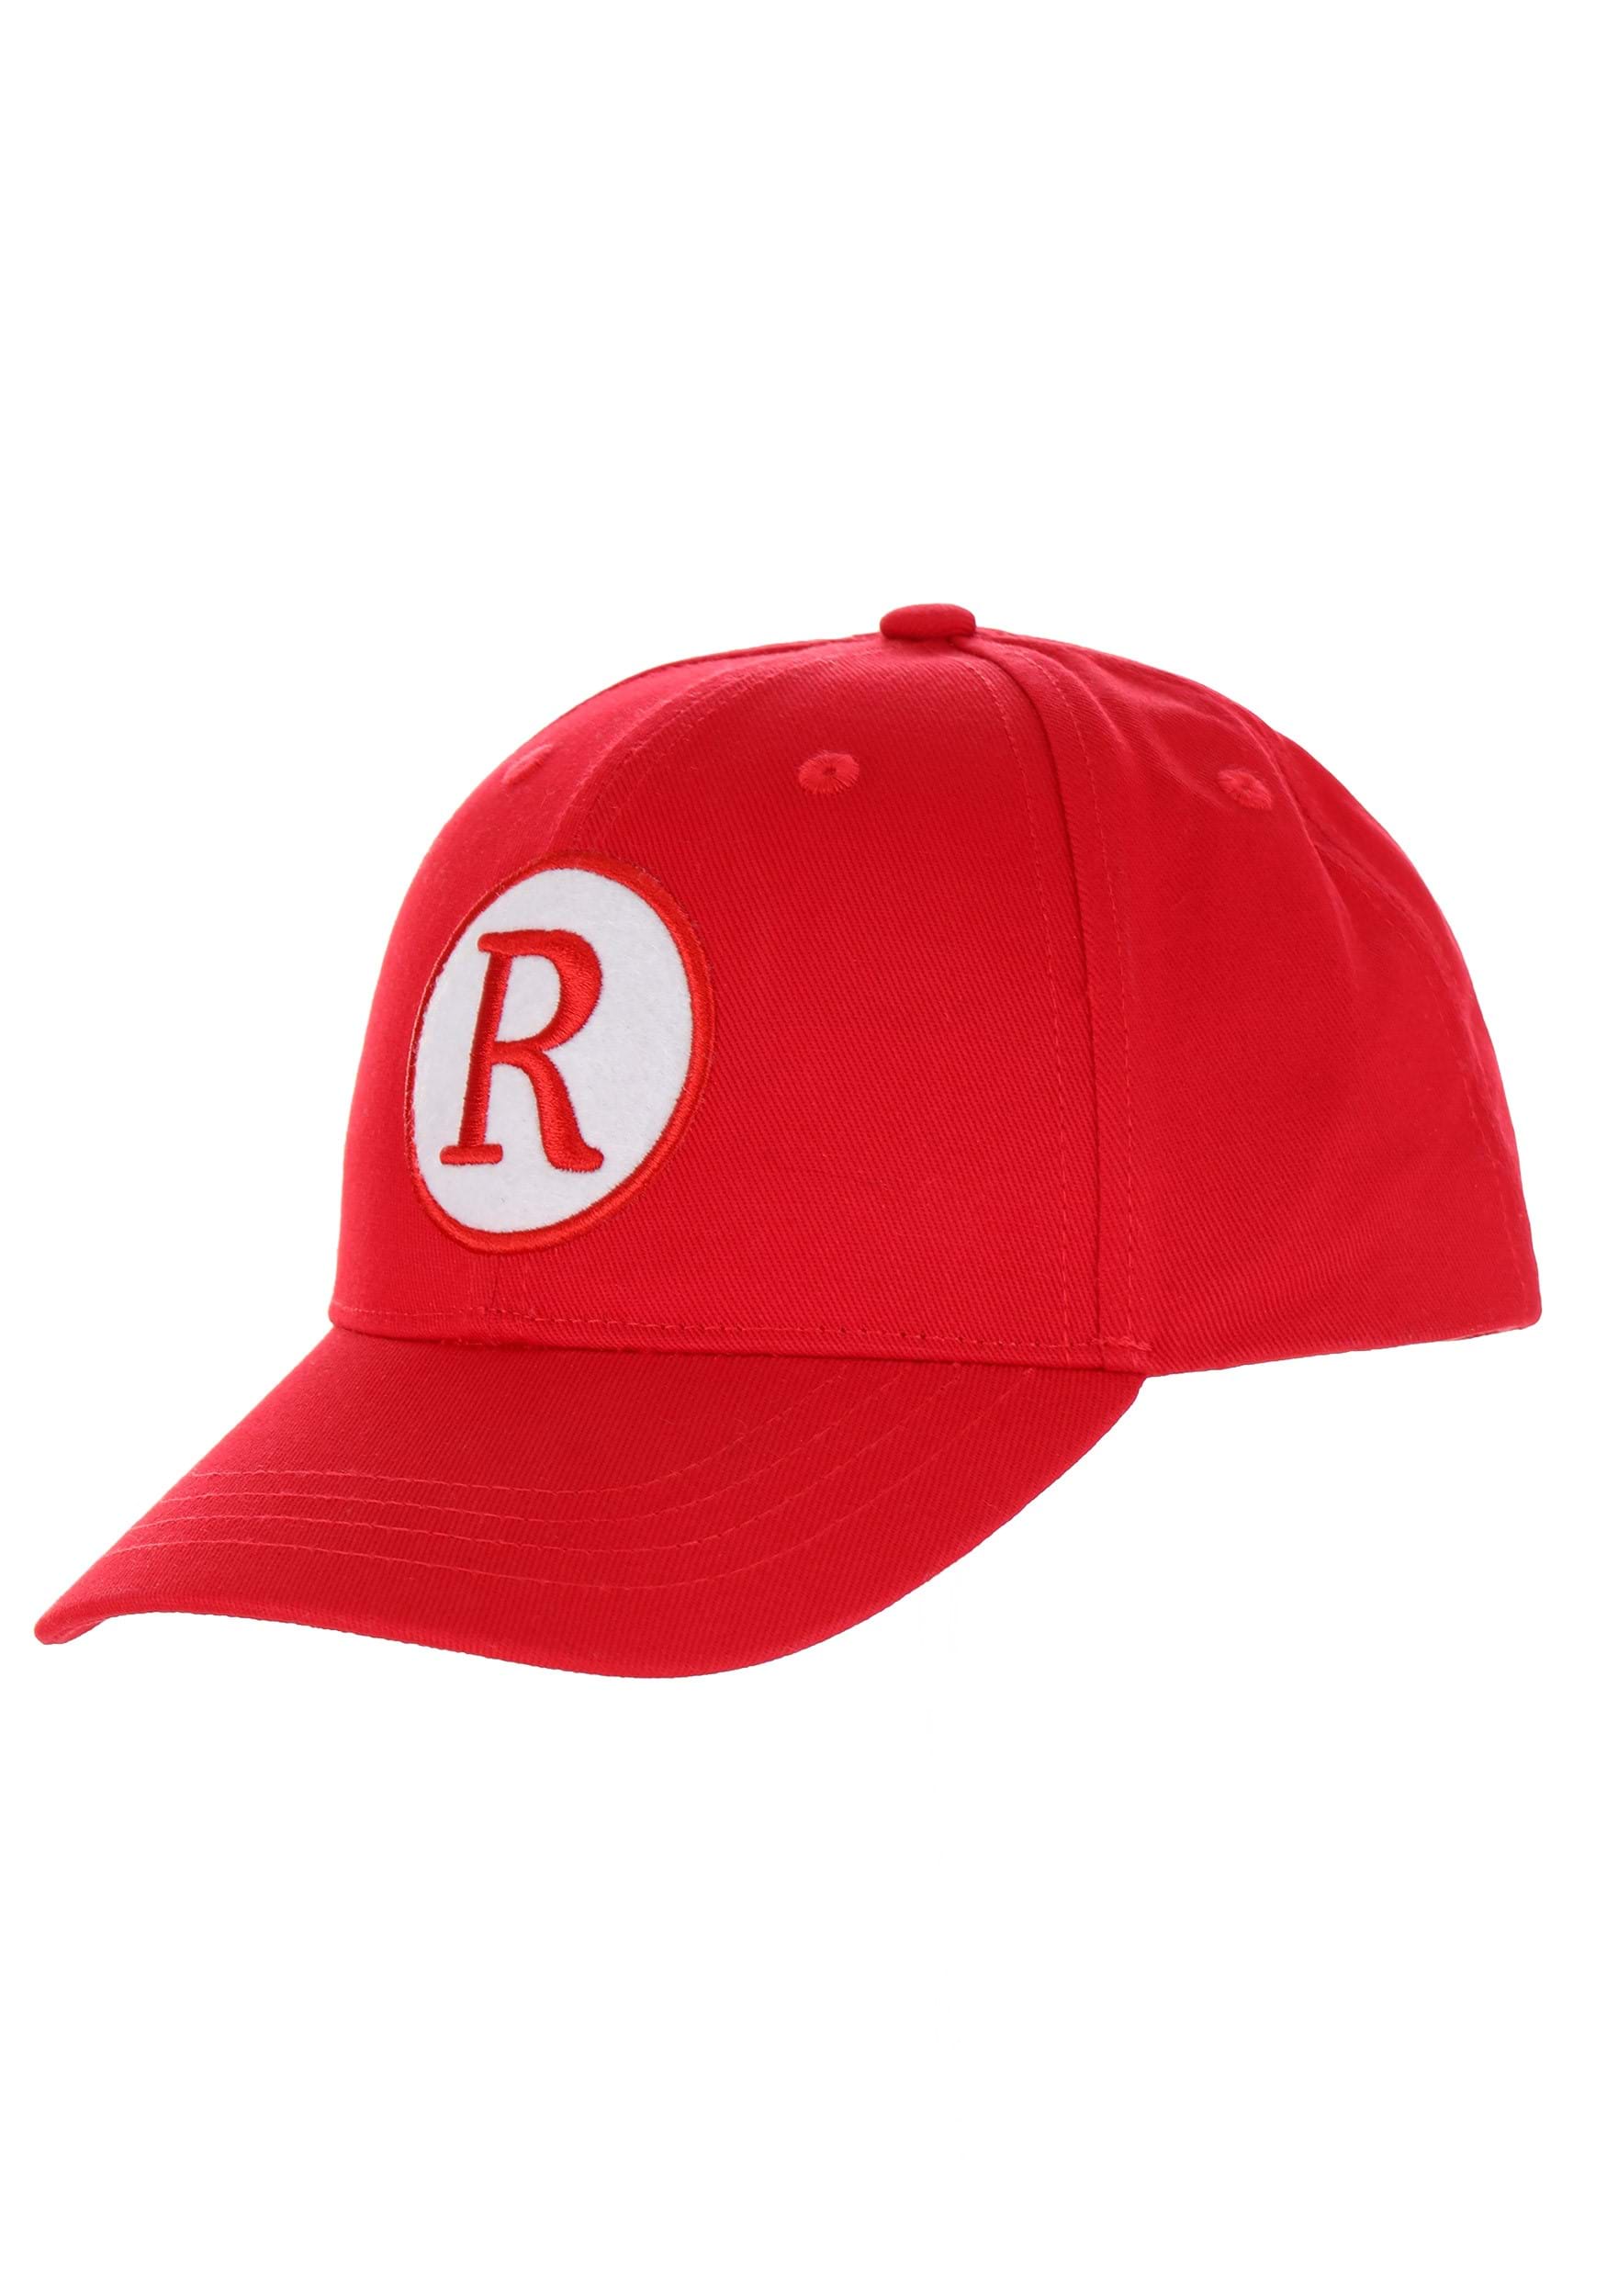 A League Of Their Own Baseball Hat For Kids